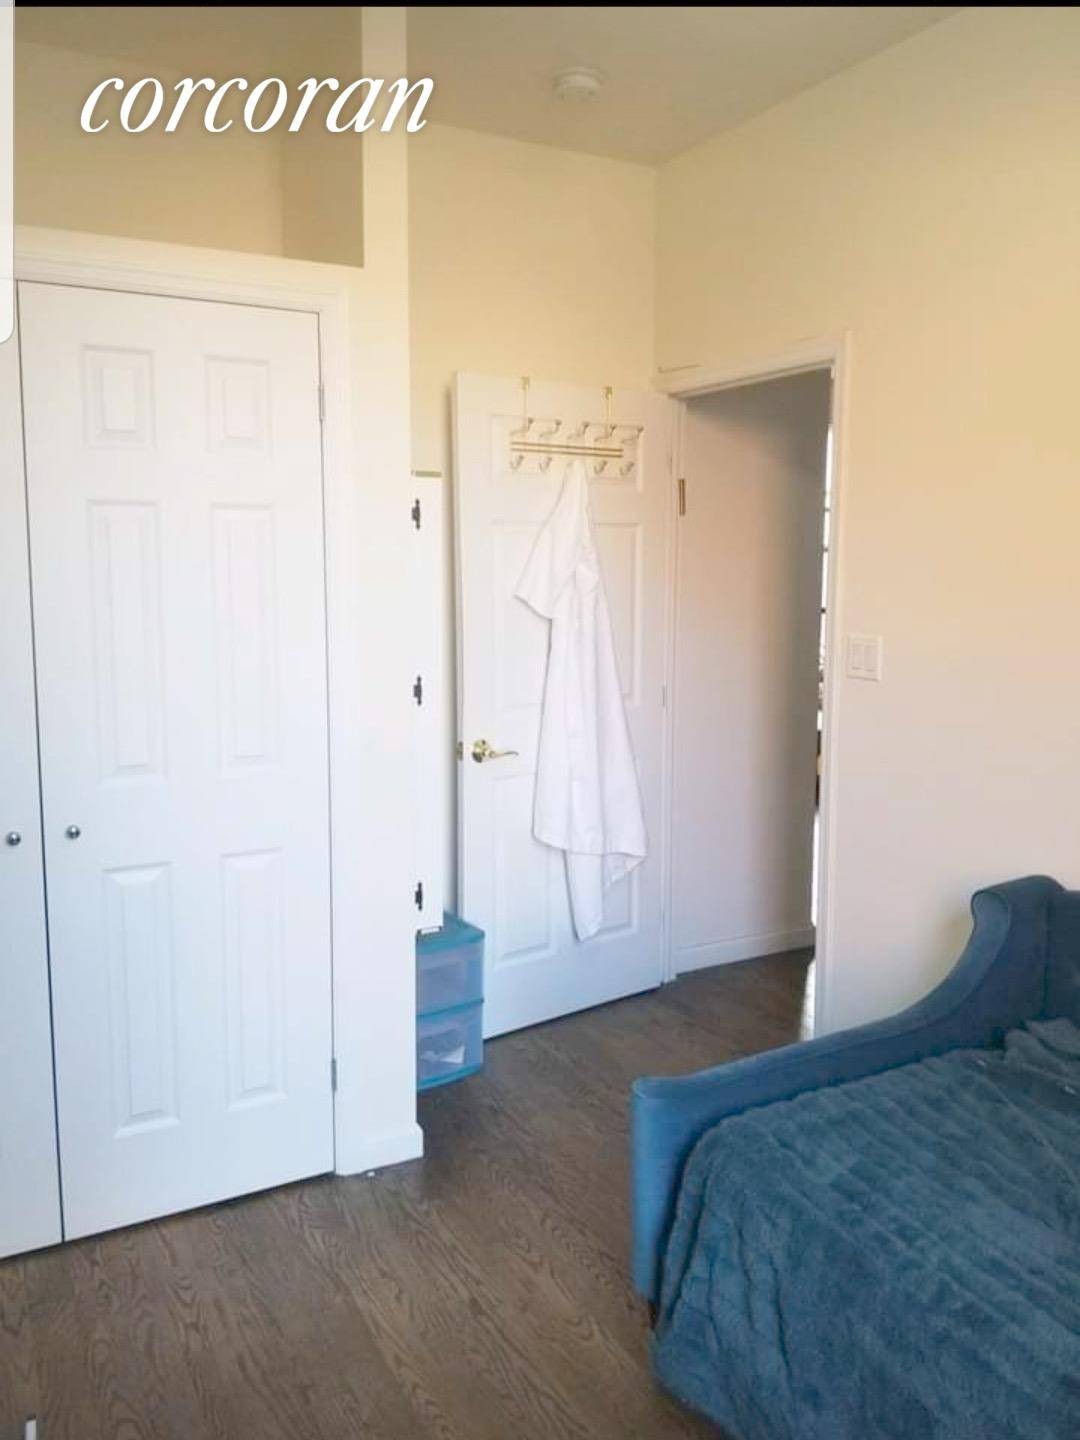 Newly renovated four bedroom, two bathroom home in elevator laundry building.